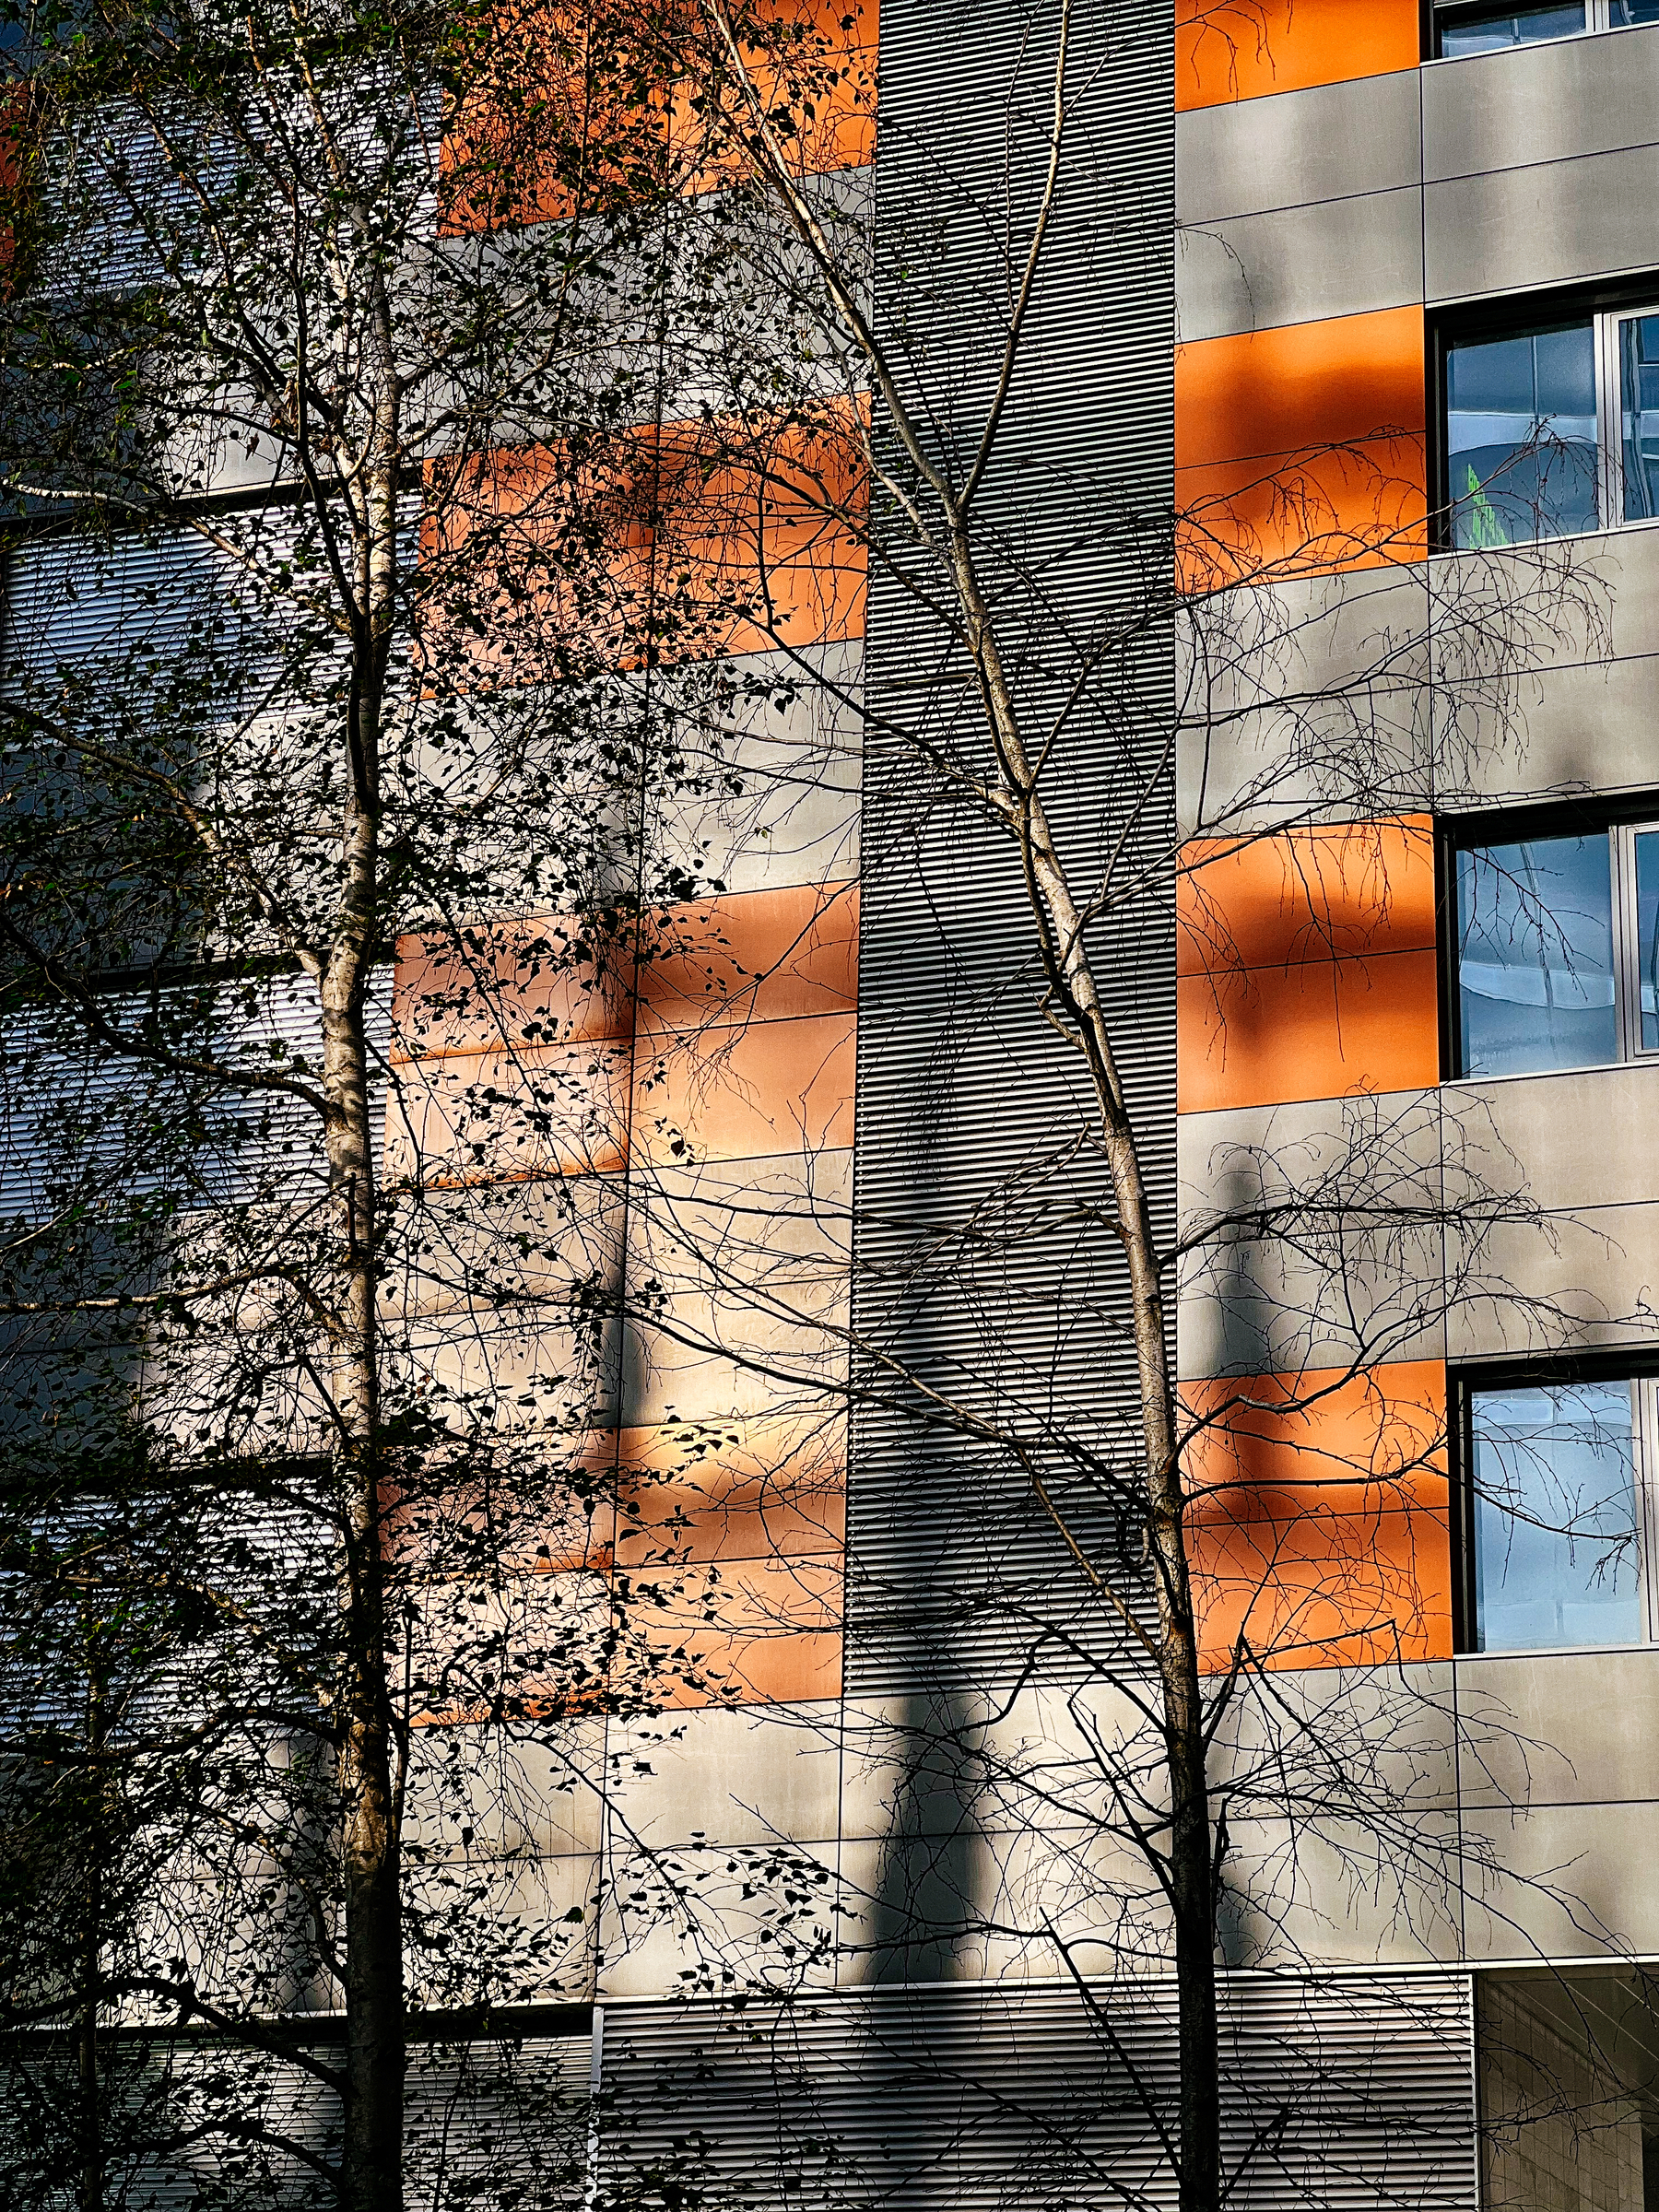 Detail of a building, with some trees in front of it, and sunlight reflected by the windows.